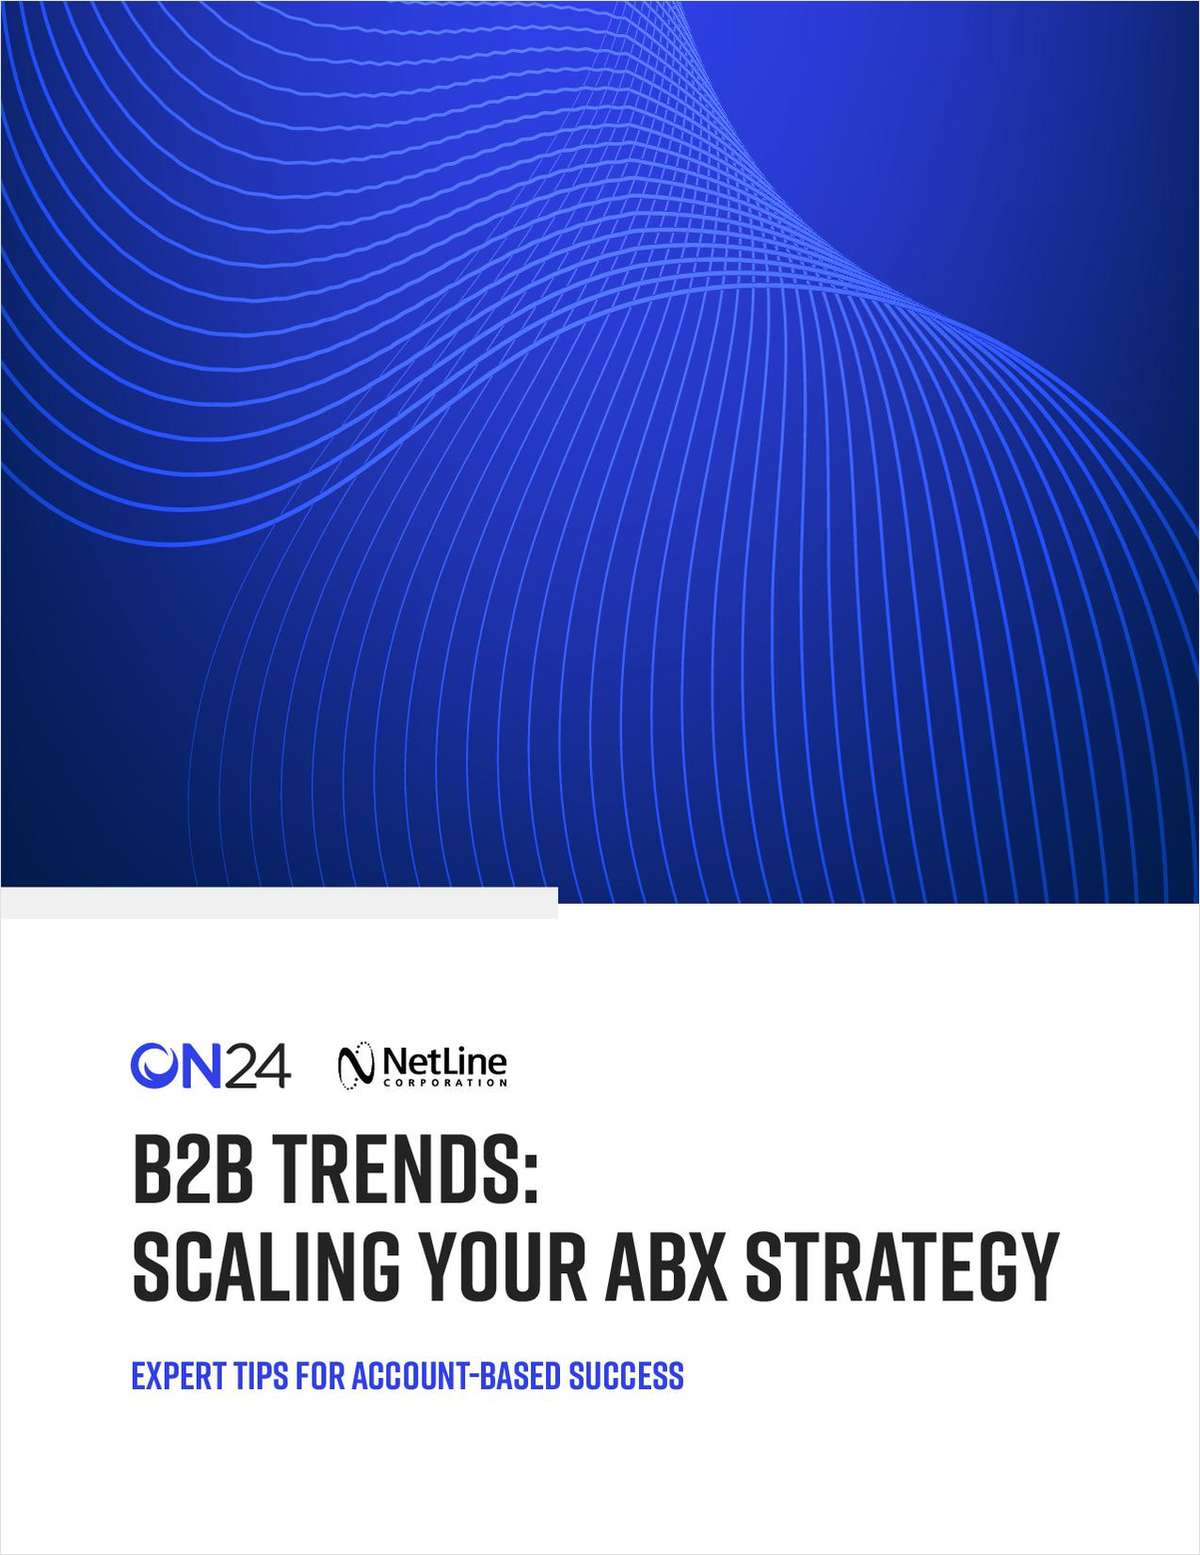 B2B Trends: Scaling Your ABX Strategy